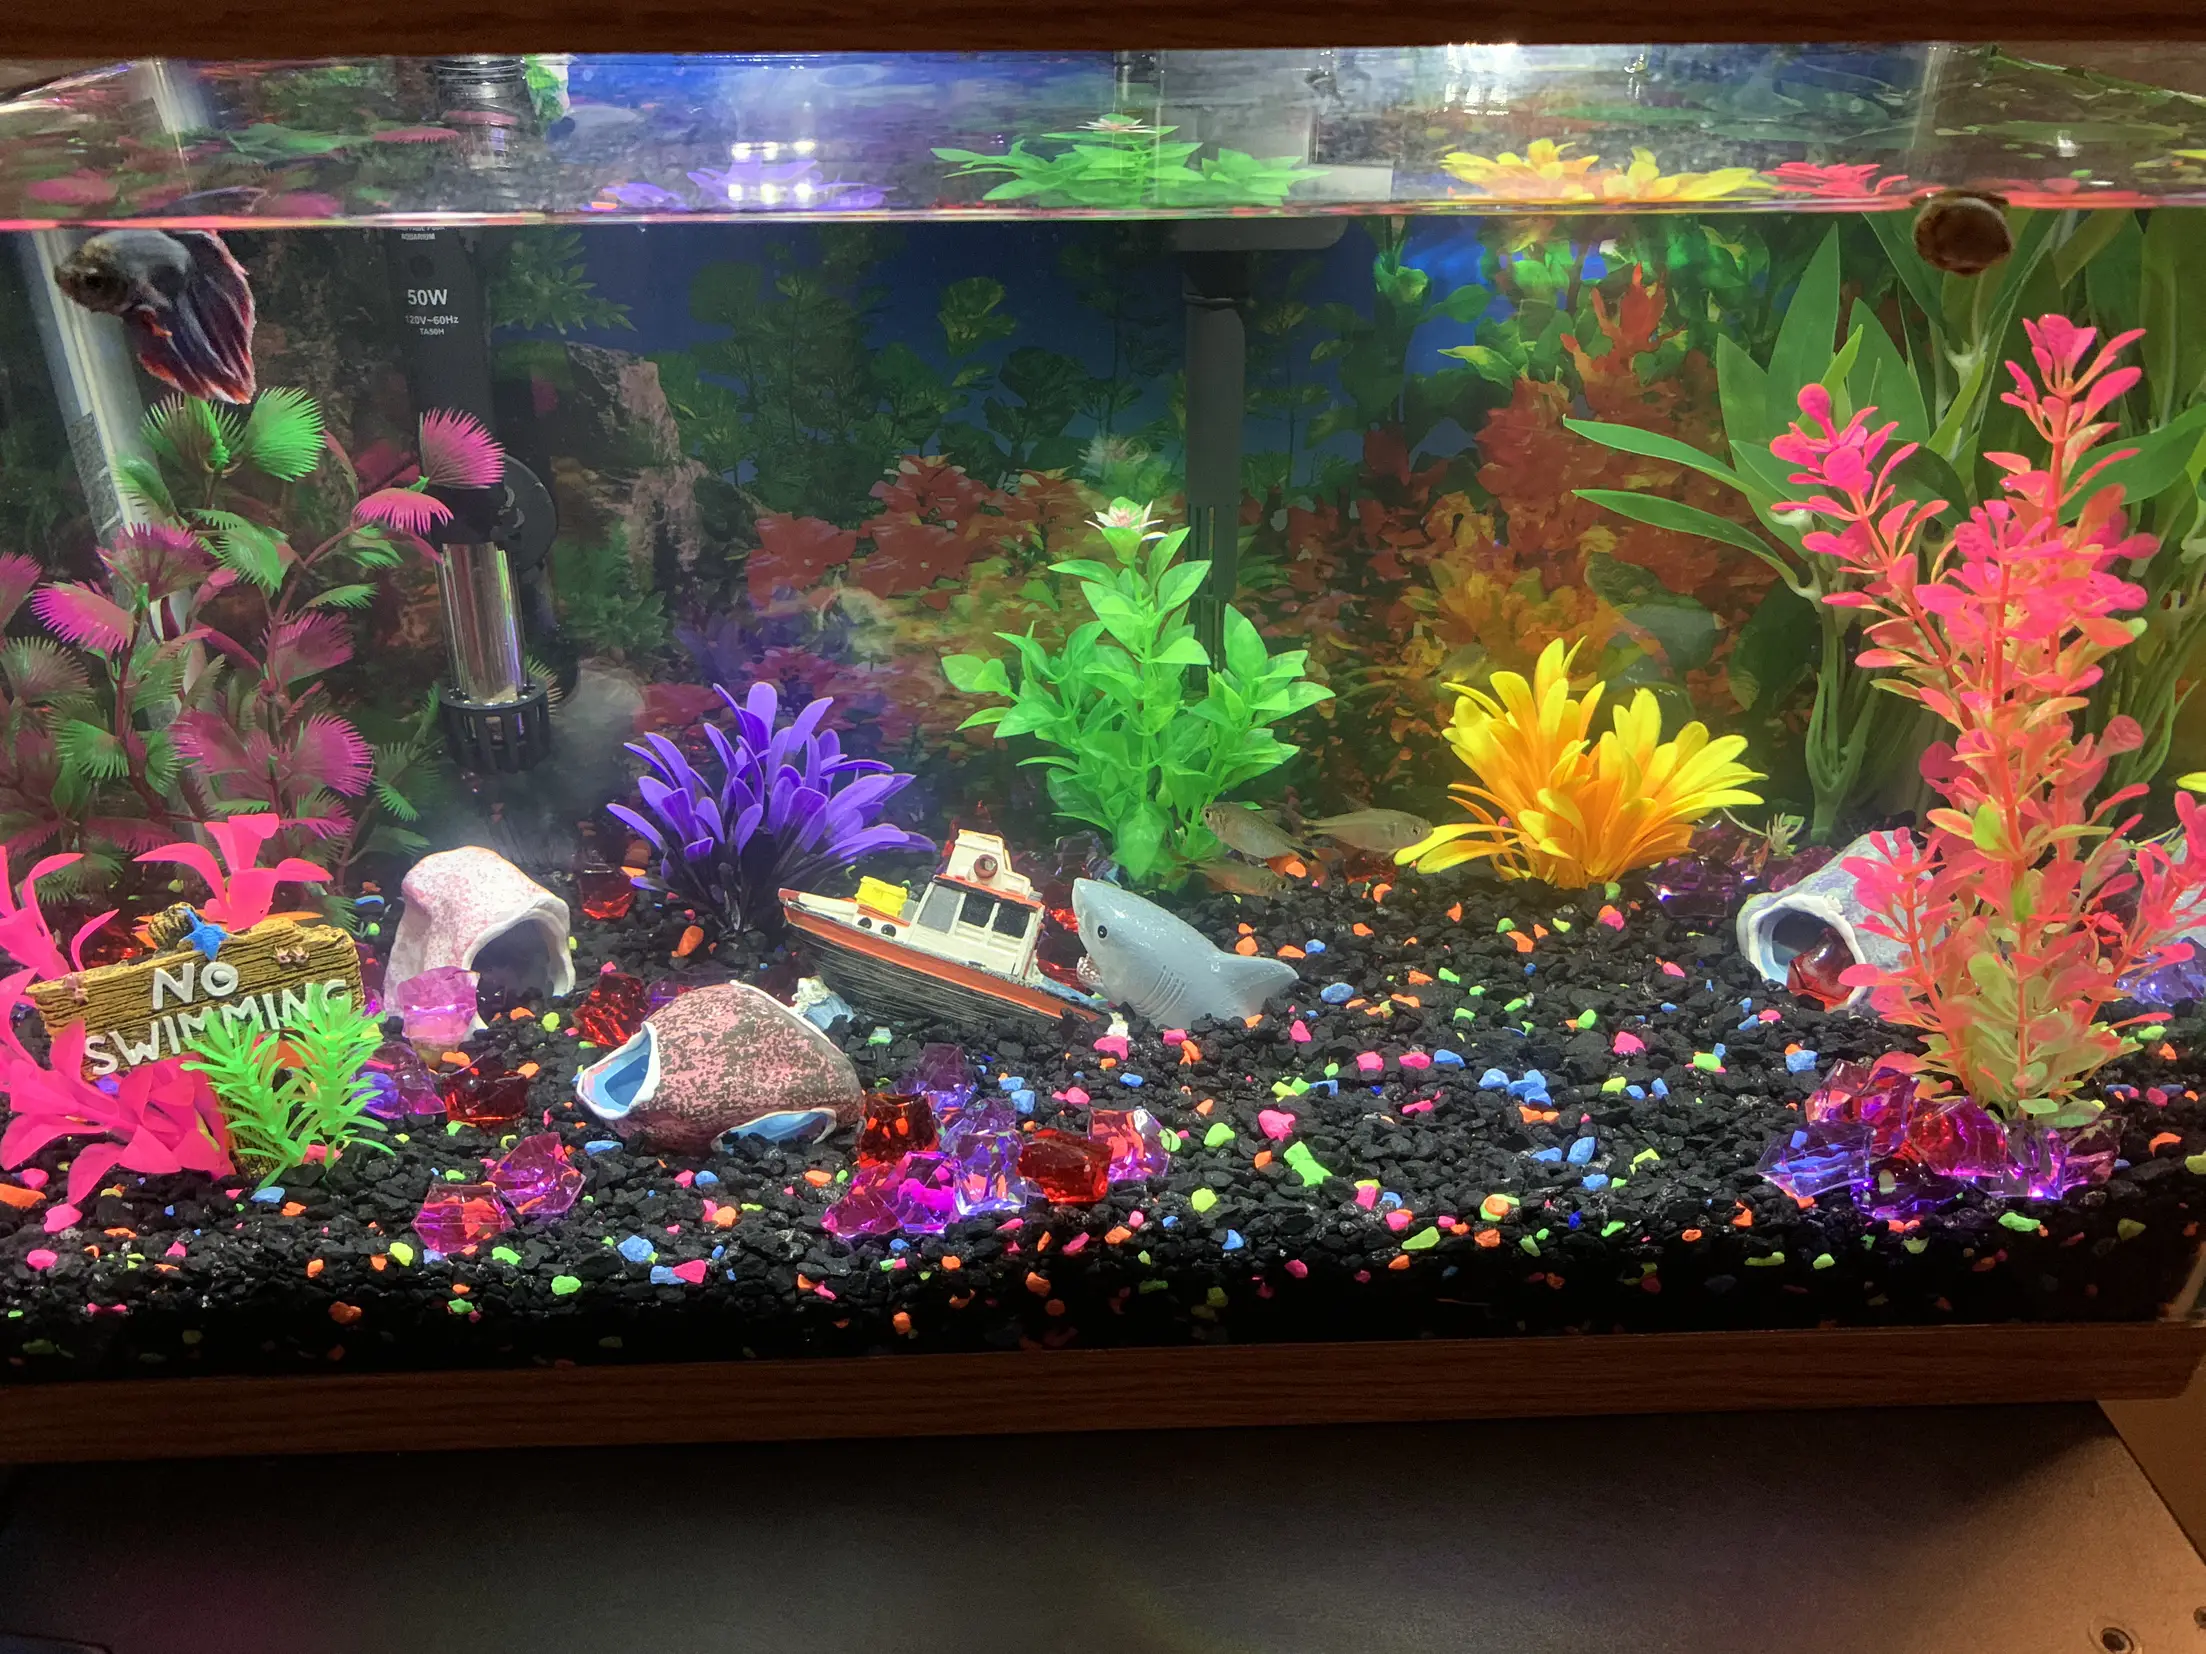 I absolutely love my new fishi, Gallery posted by Taylor Draper